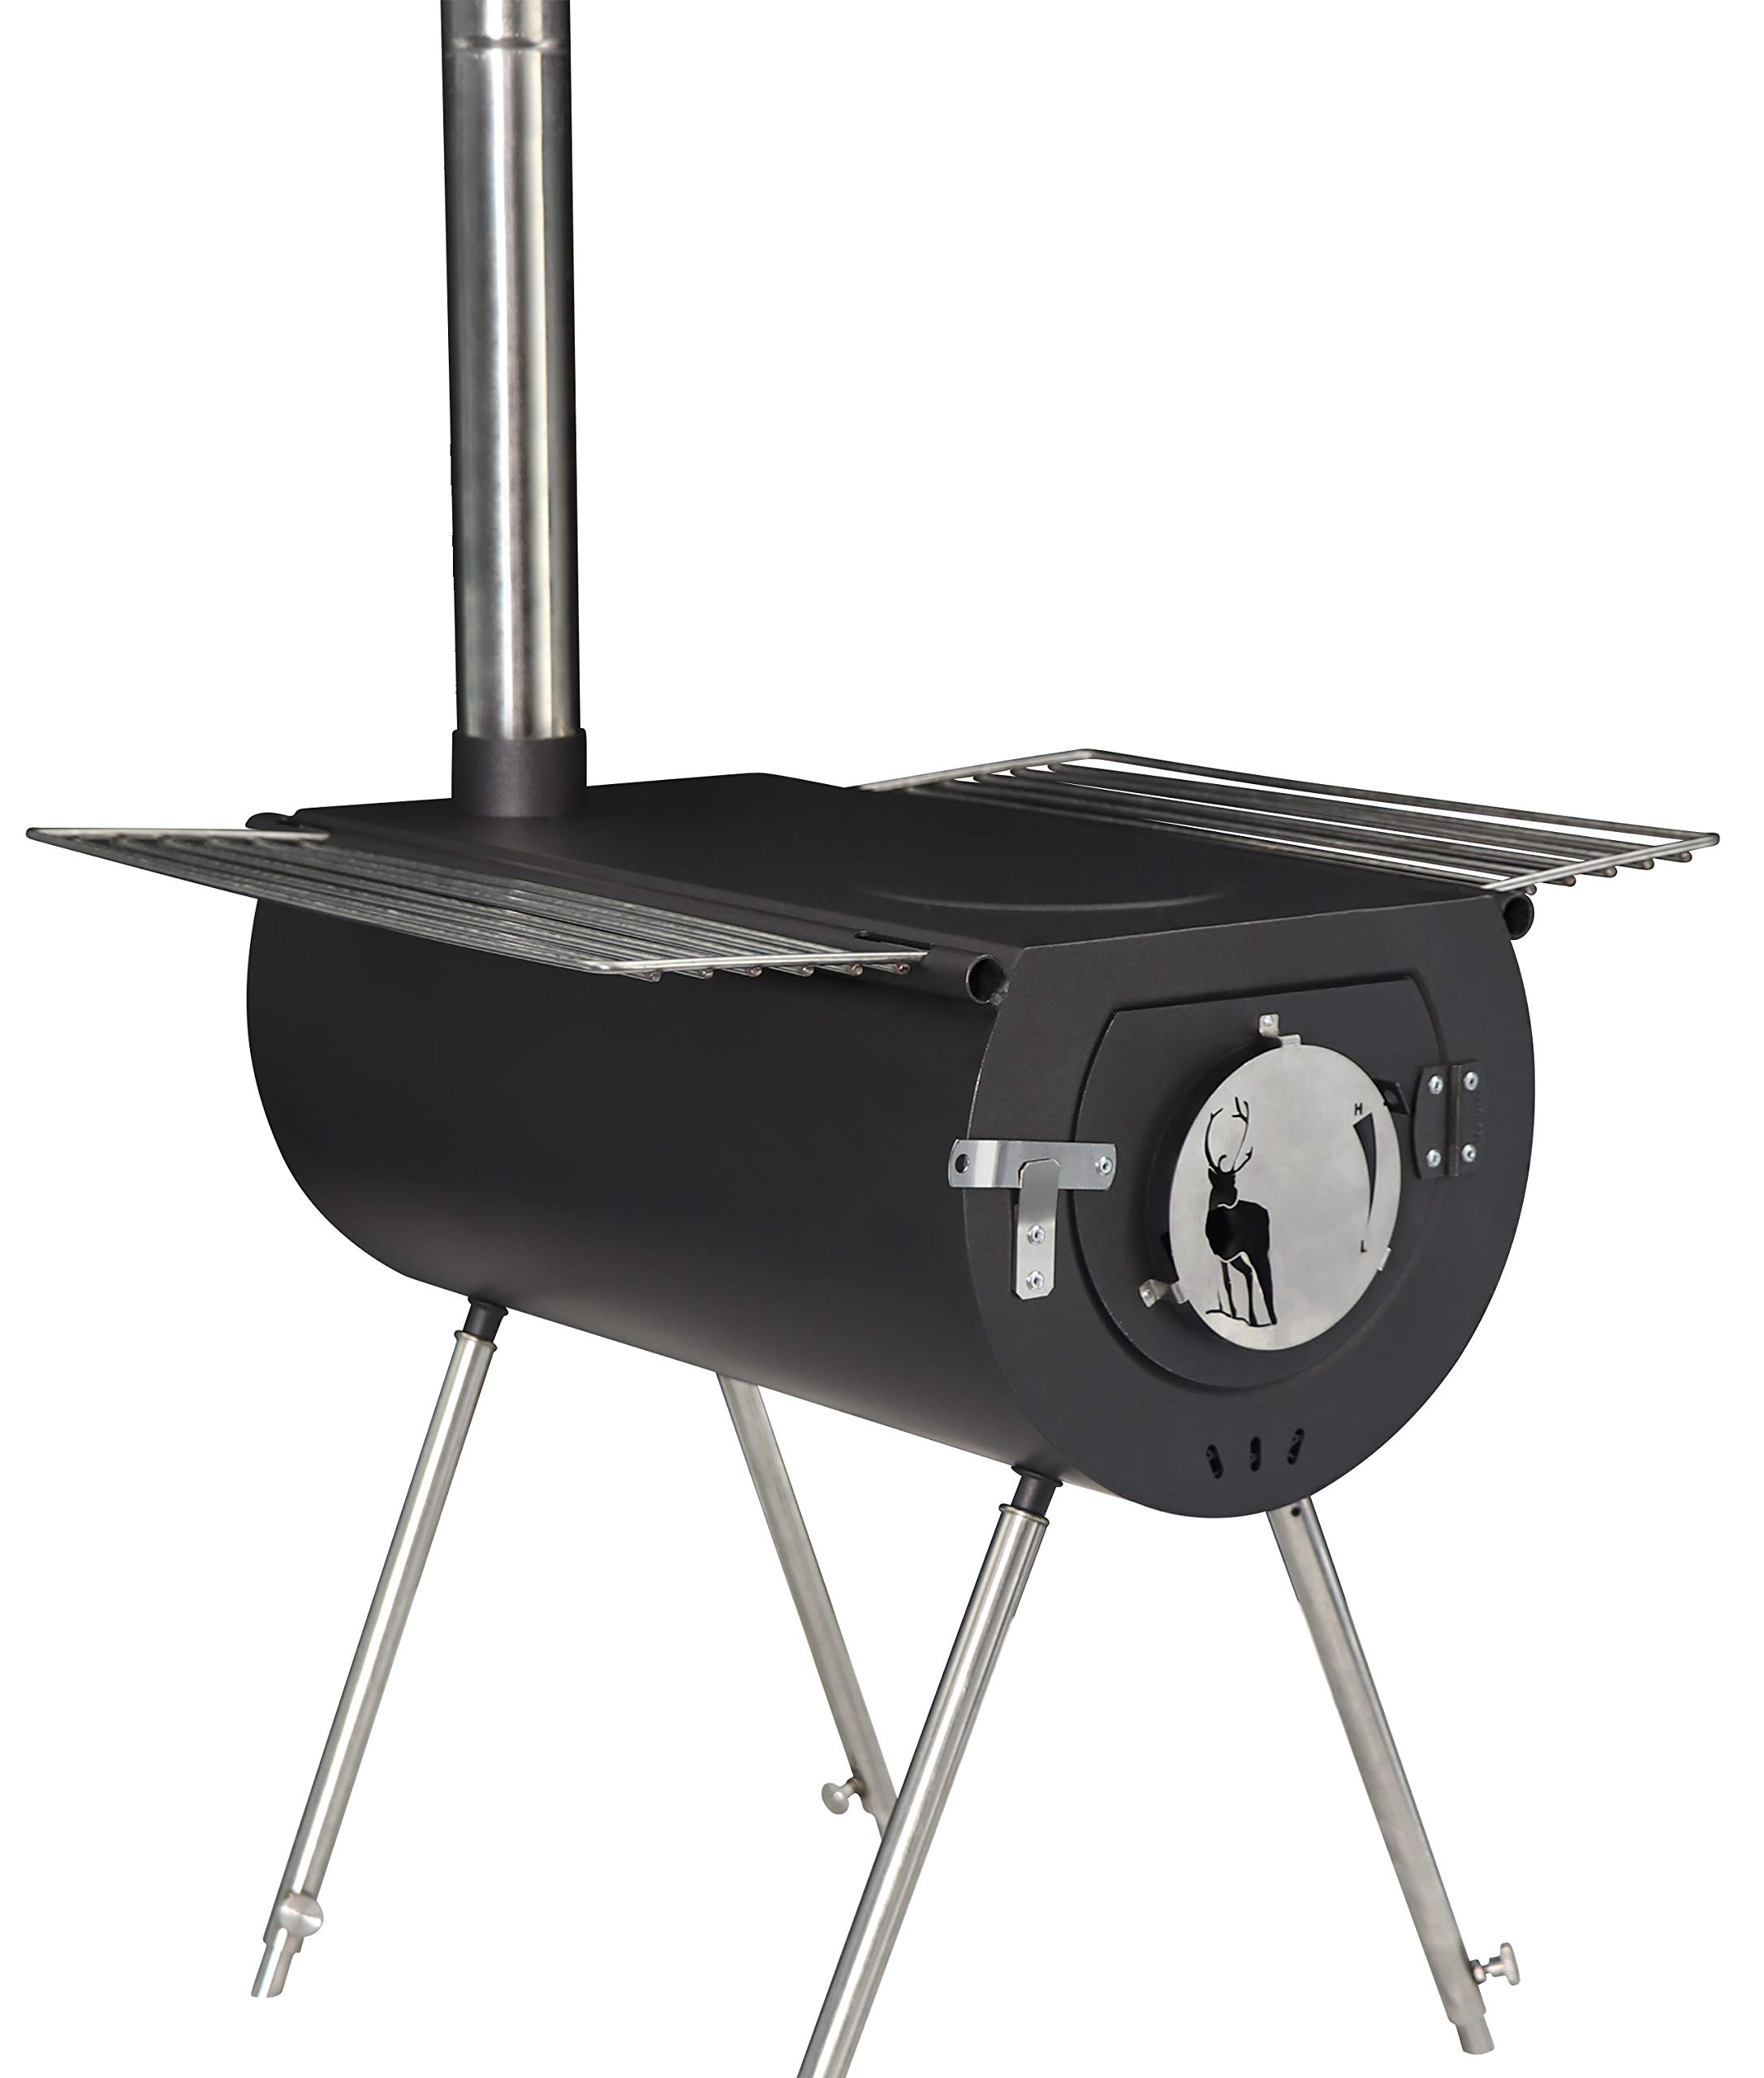 US Stove Caribou Portable Camp Stove: 14" Caribou Backpacker $74.39, 18" Caribou Outfitter $98.07 + Free Shipping